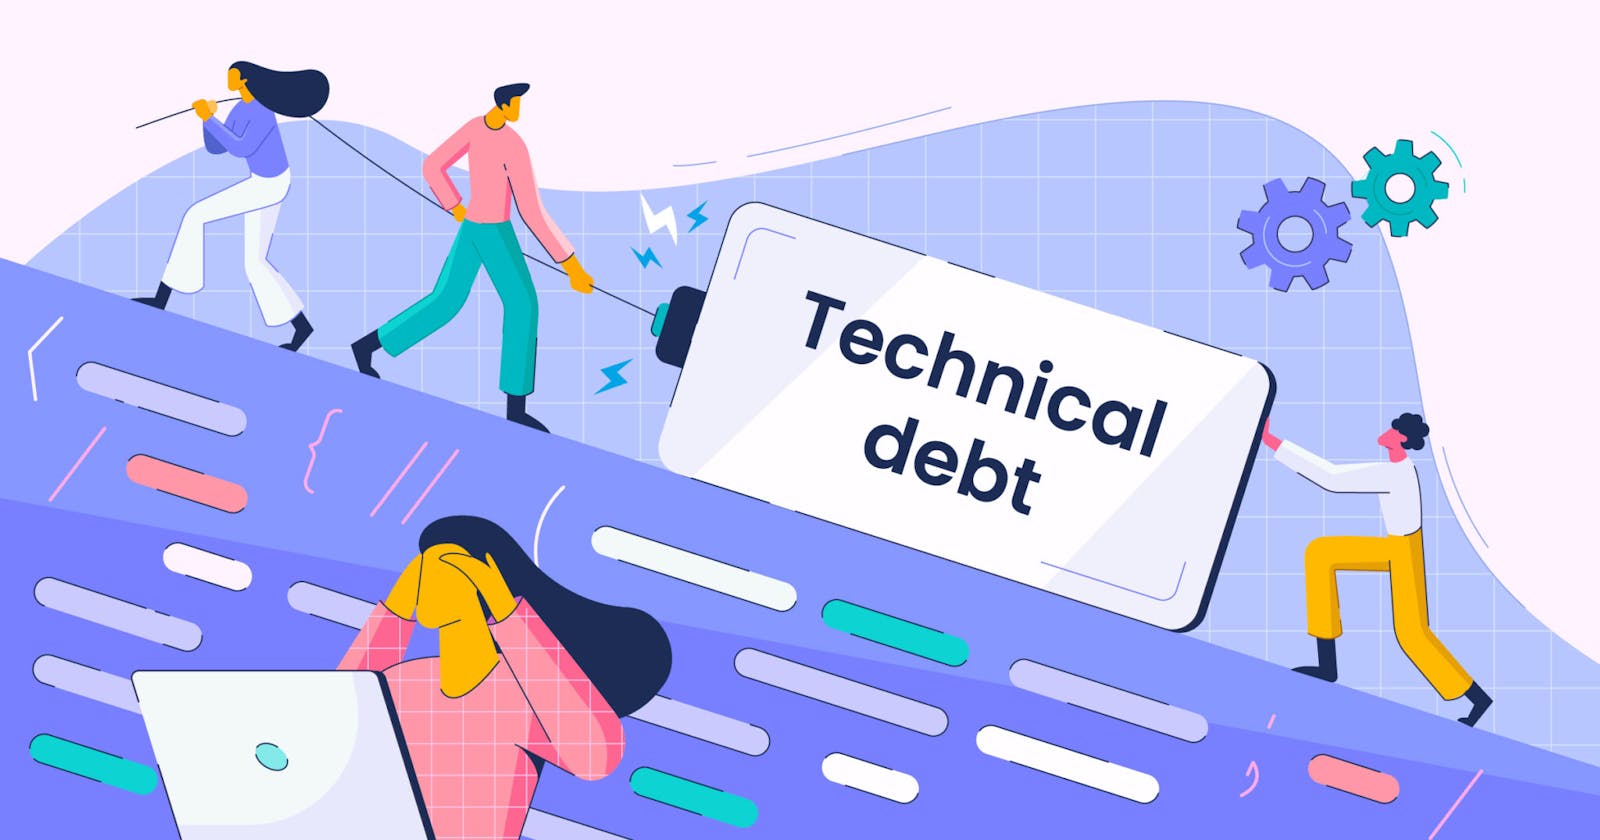 Tech debt: what is it & how to prevent it